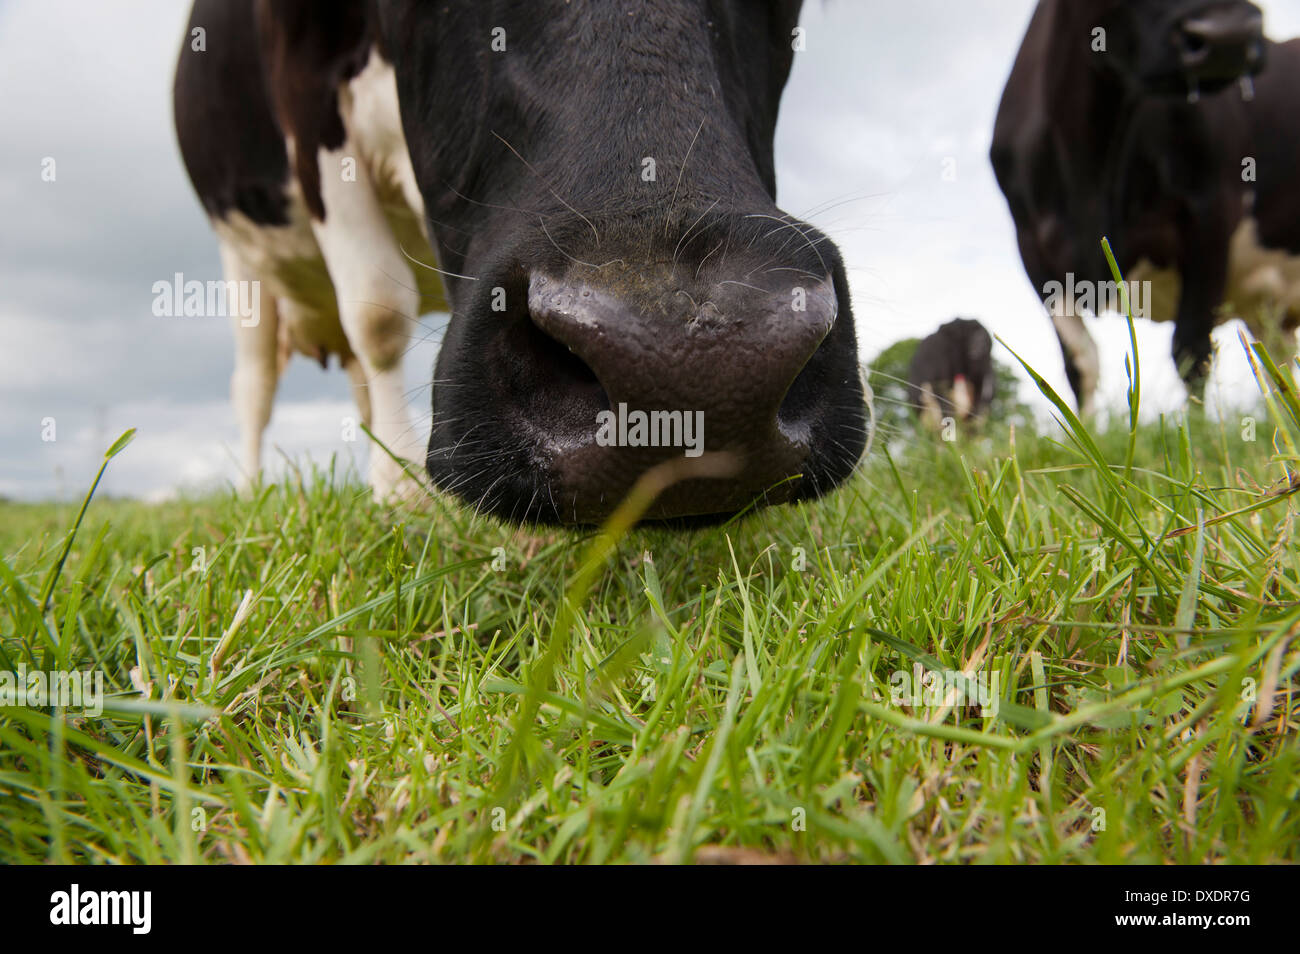 Cows nose sniffing grass. Stock Photo